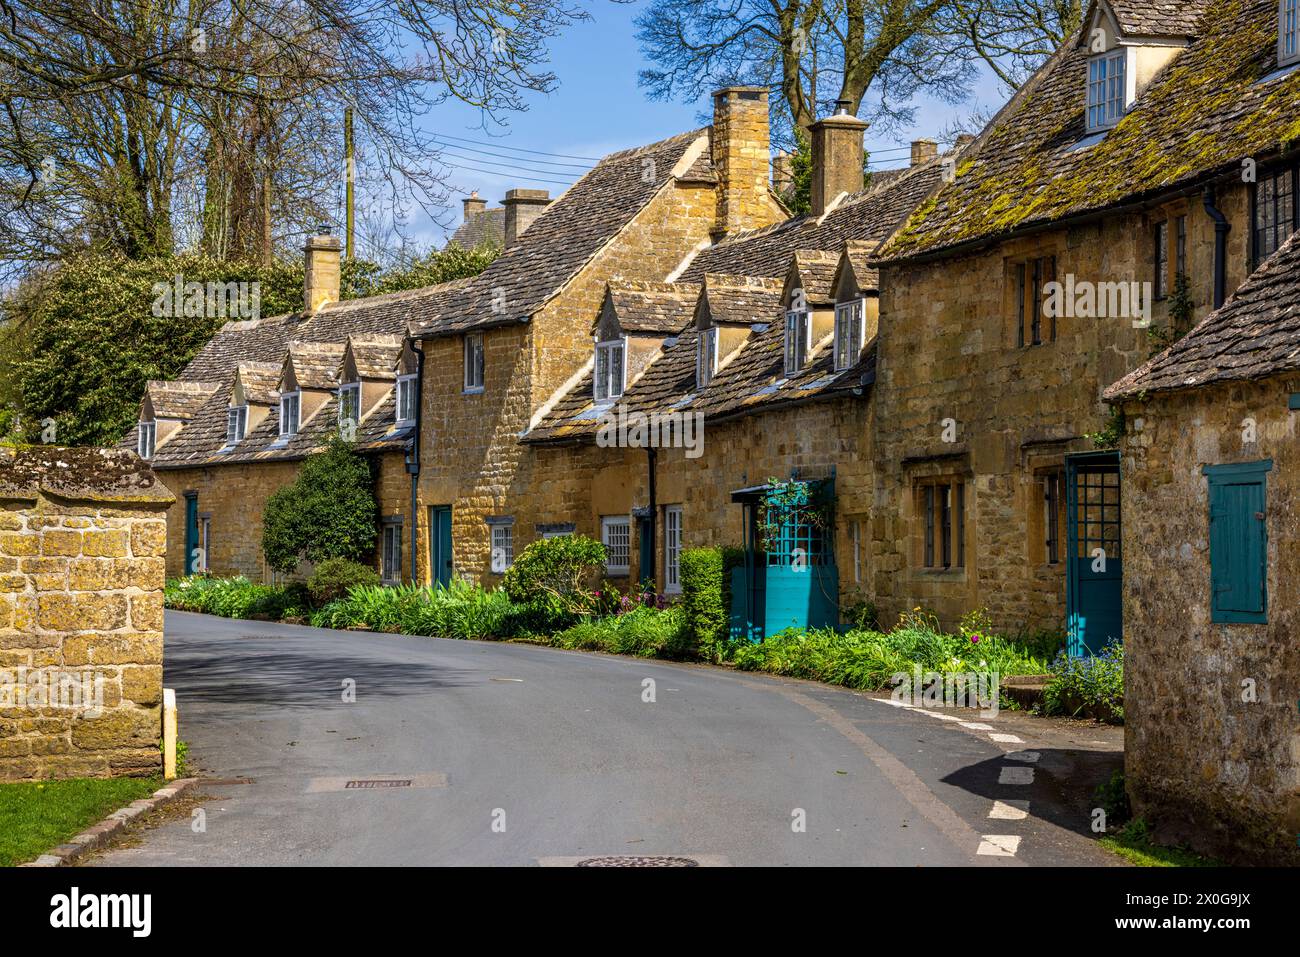 Cotswold Stone Cottages im Dorf Snowshill, Gloucestershire, England Stockfoto